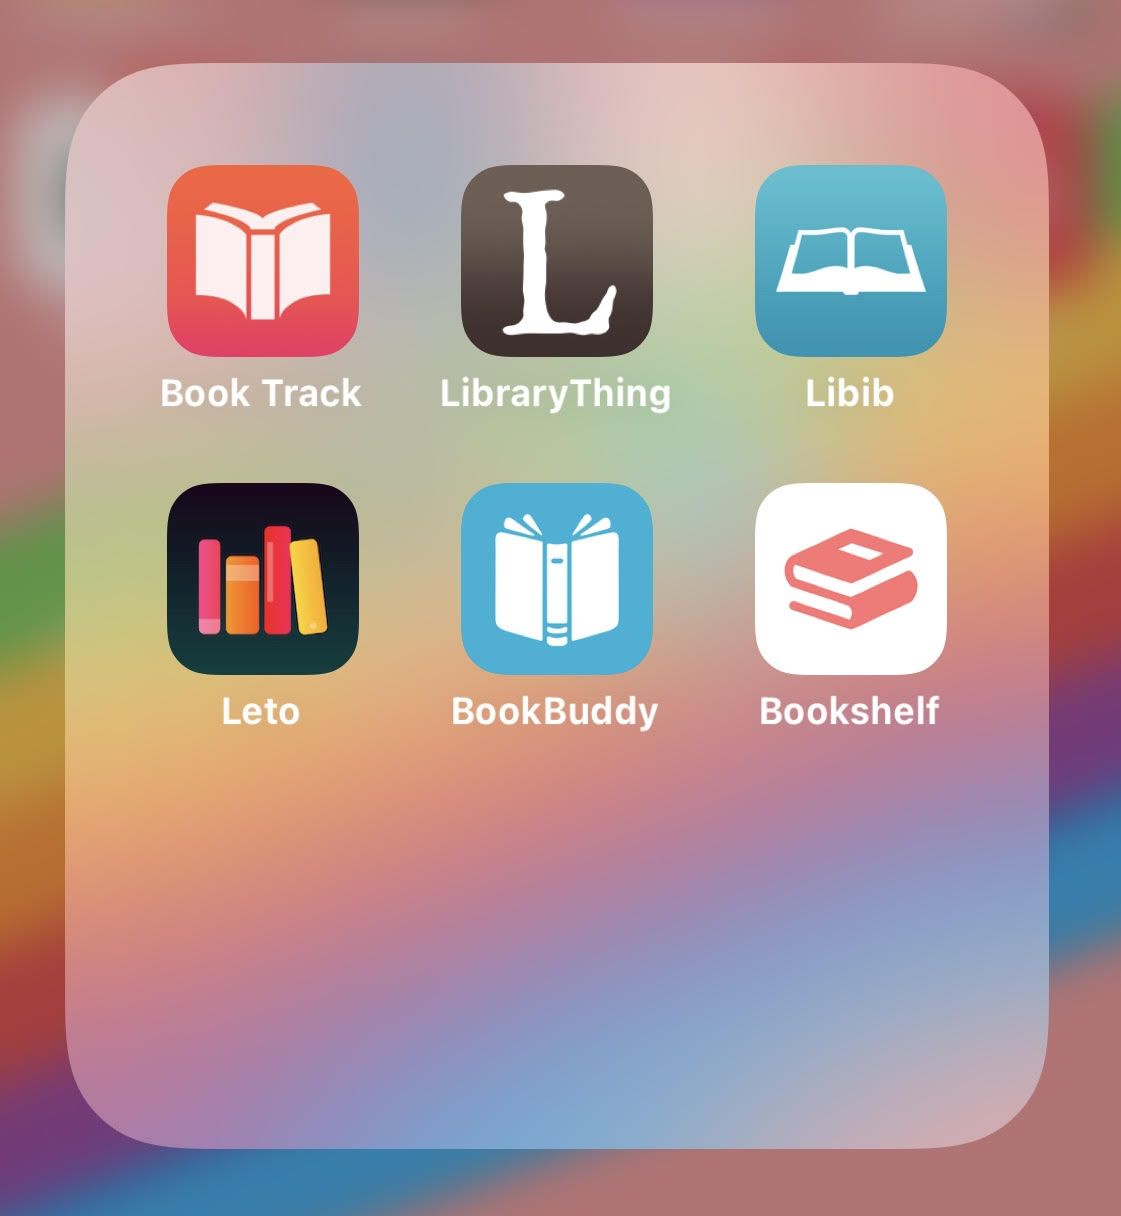 A screenshot of a phone showing 6 app icons. The apps are  Book Track, Library Thing, Libib, Leto, Book Buddy, and Bookshelf. 